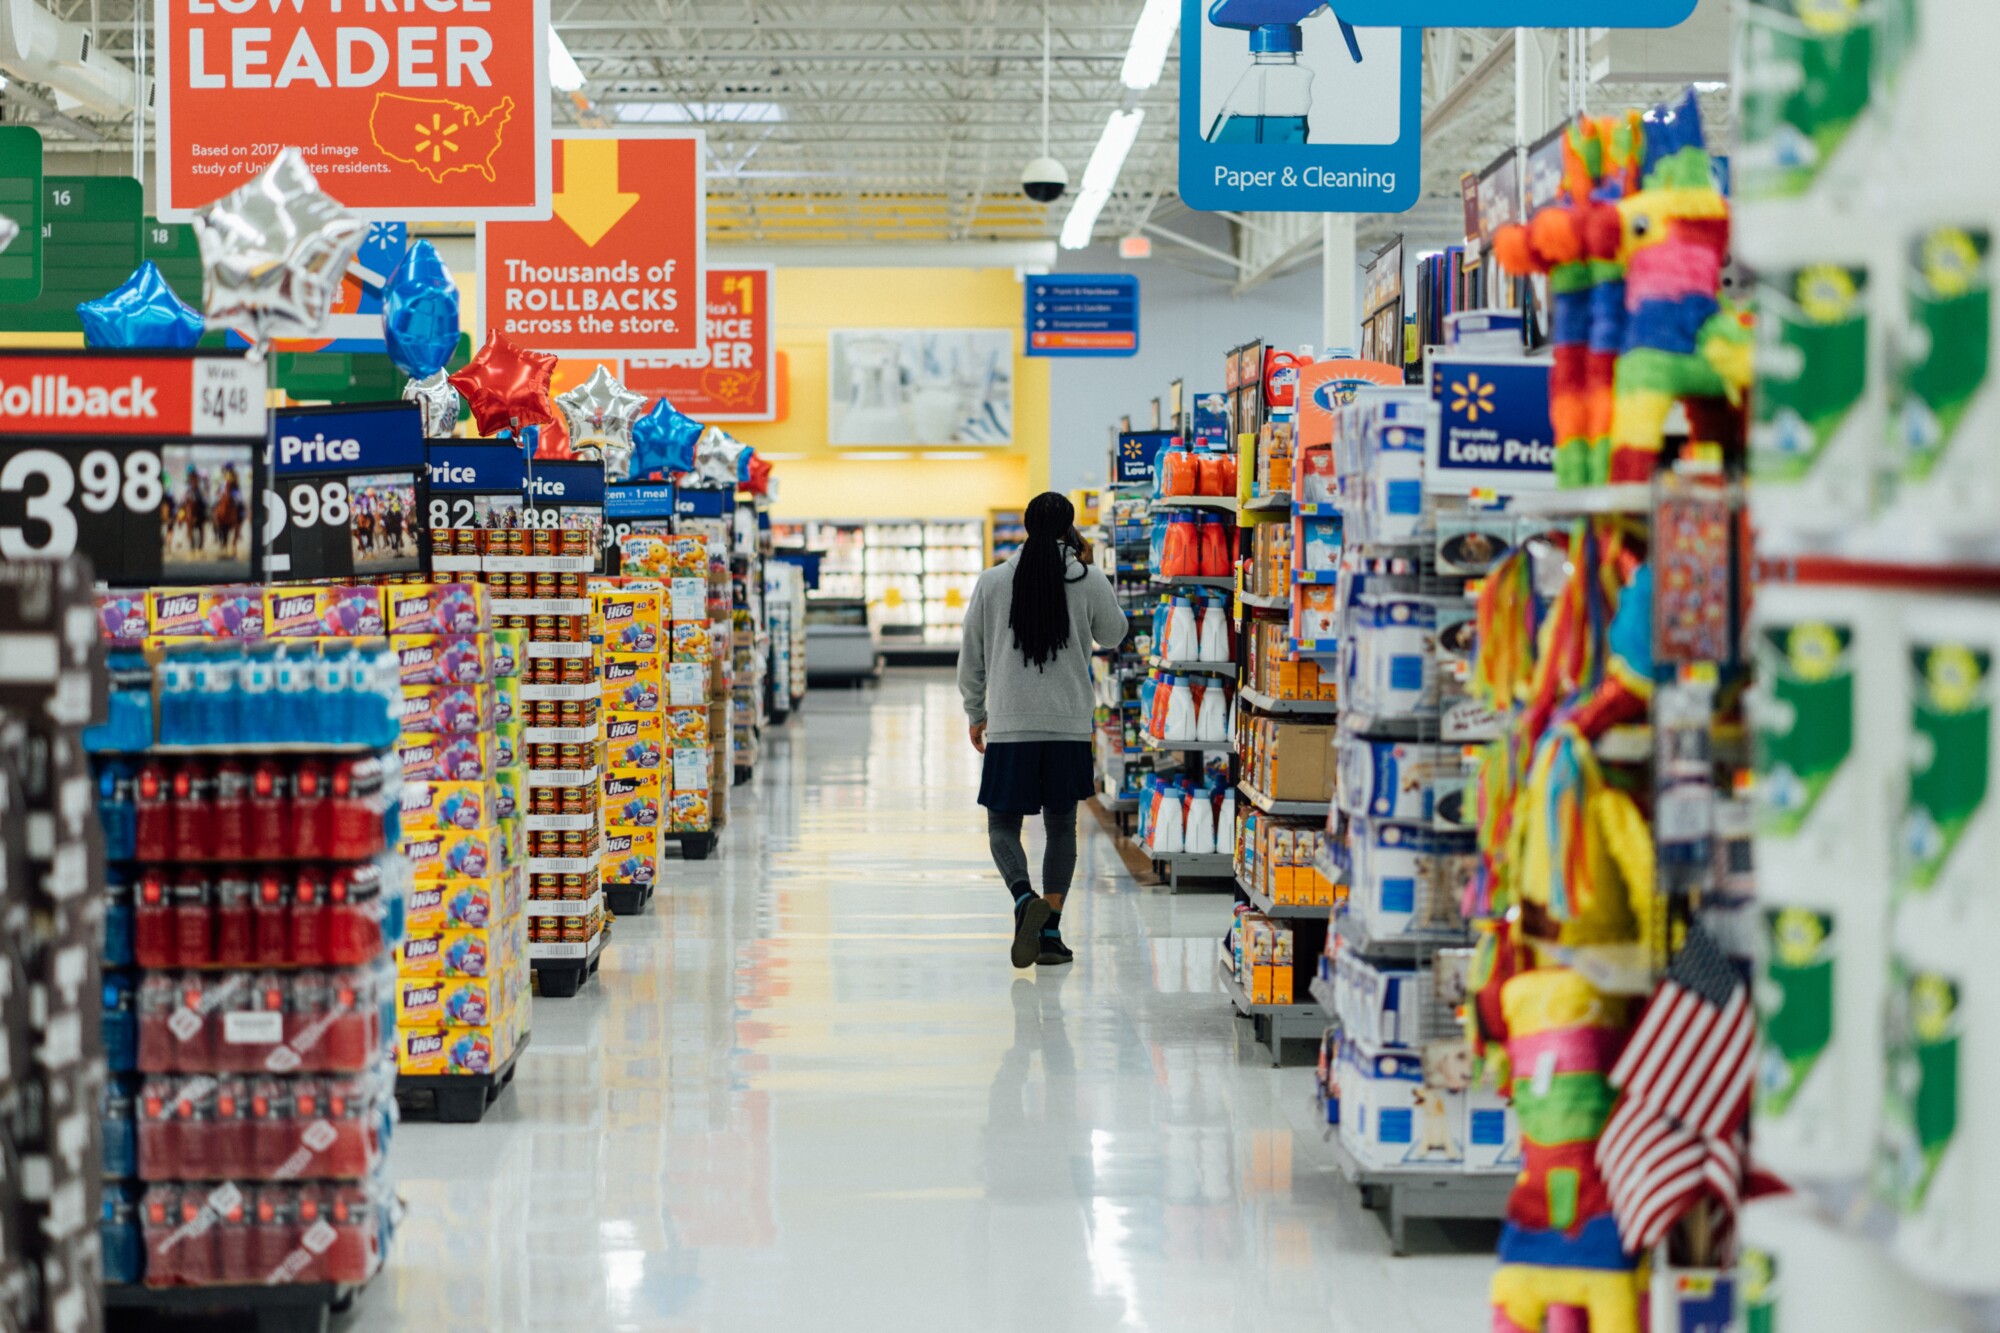 Photograph of a person walking down a supermarket aisle